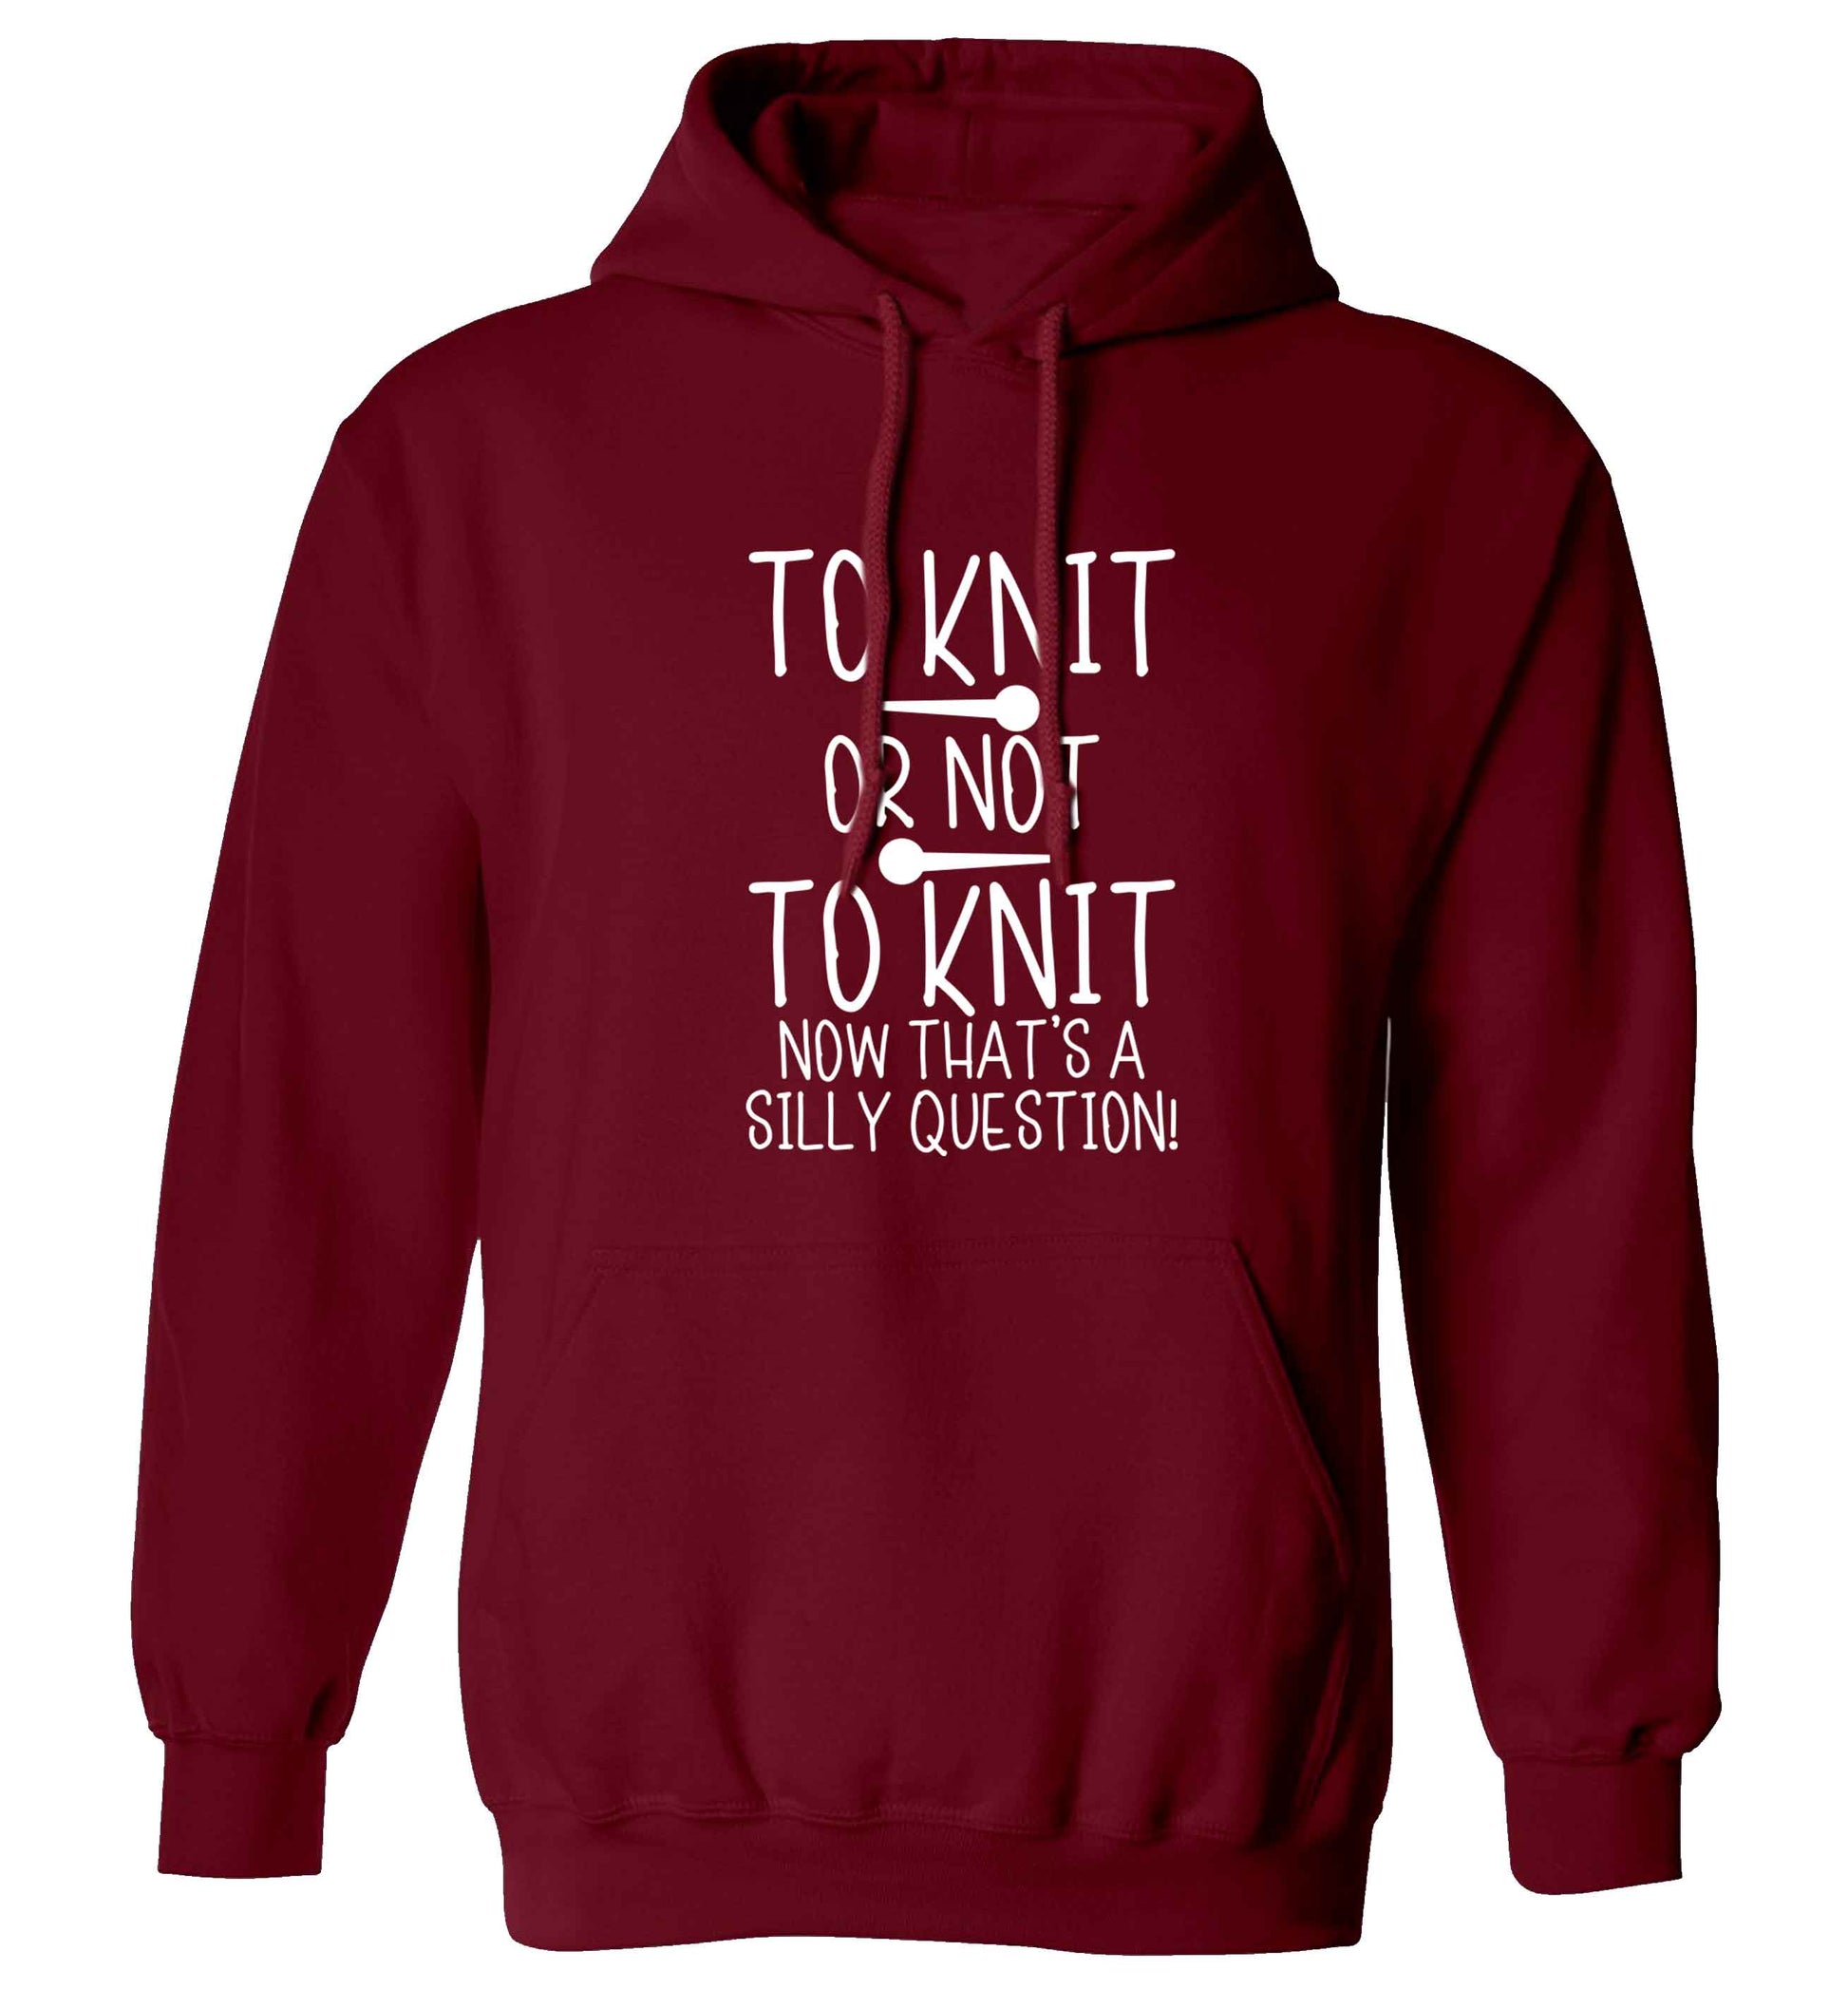 To knit or not to knit now that's a silly question adults unisex maroon hoodie 2XL